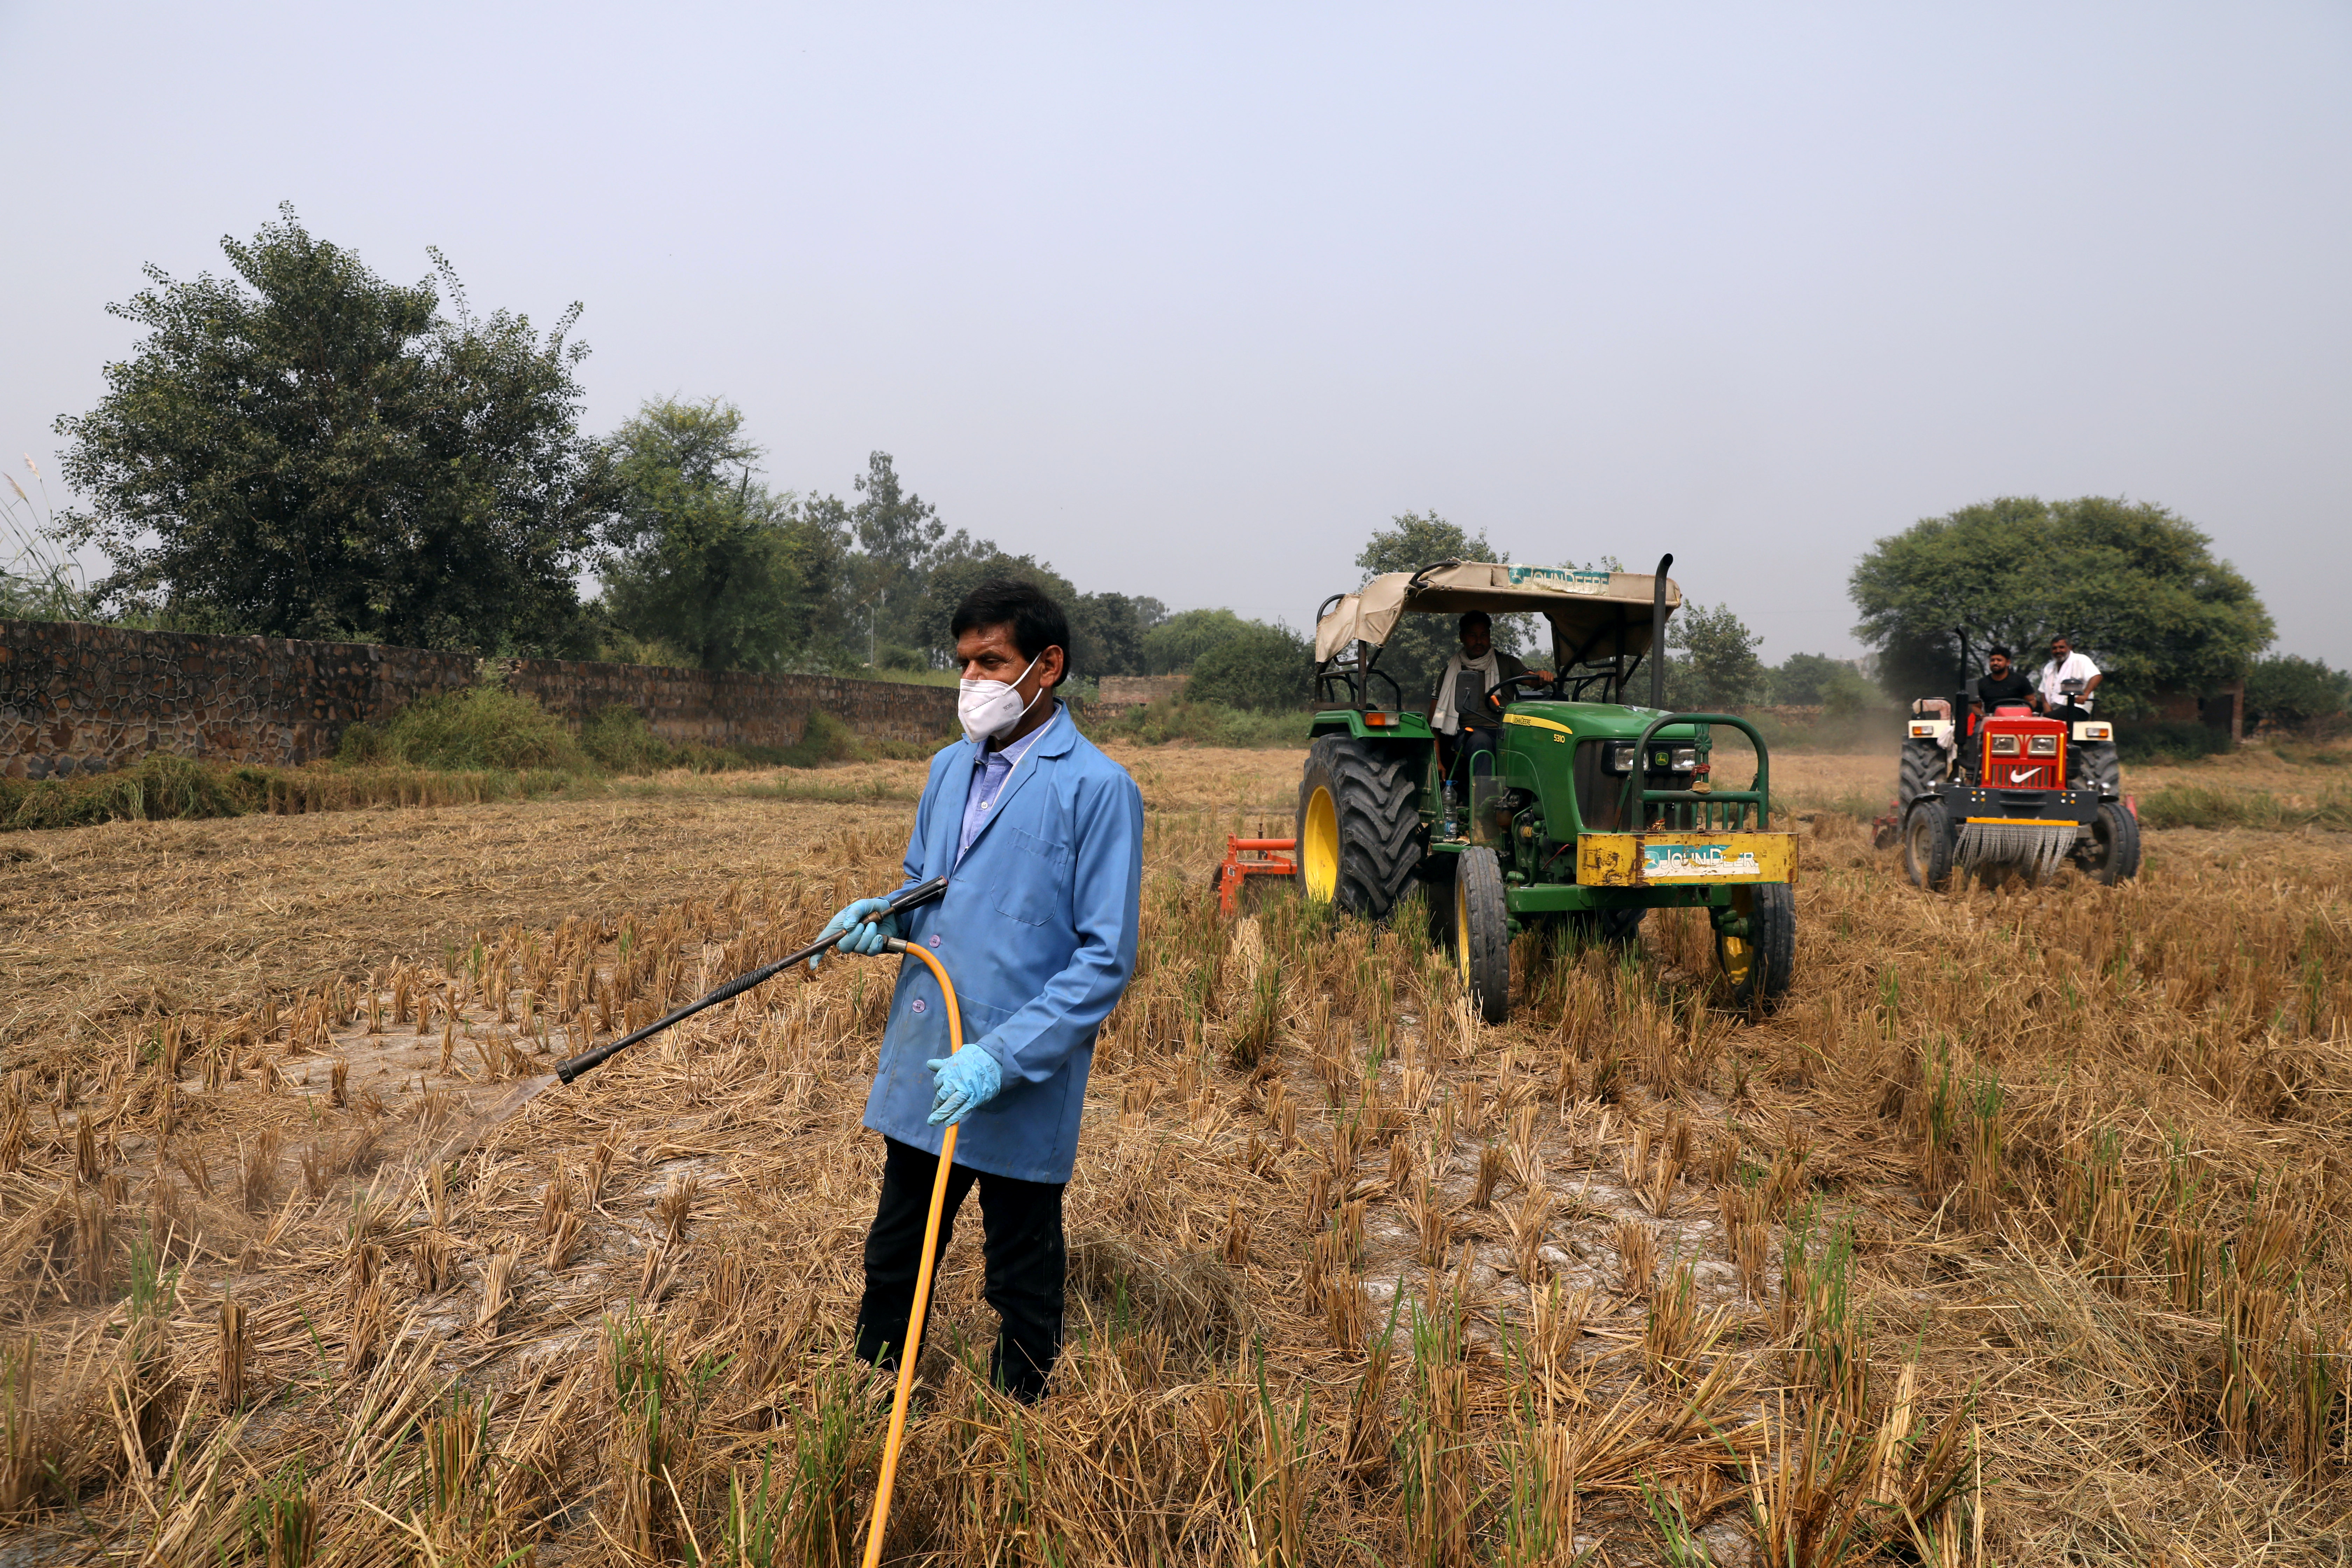 A man sprays newly-developed bio-decomposer solution in a field to prevent stubble burning, in New Delhi, India, October 13, 2020. REUTERS/Anushree Fadnavis/File Photo